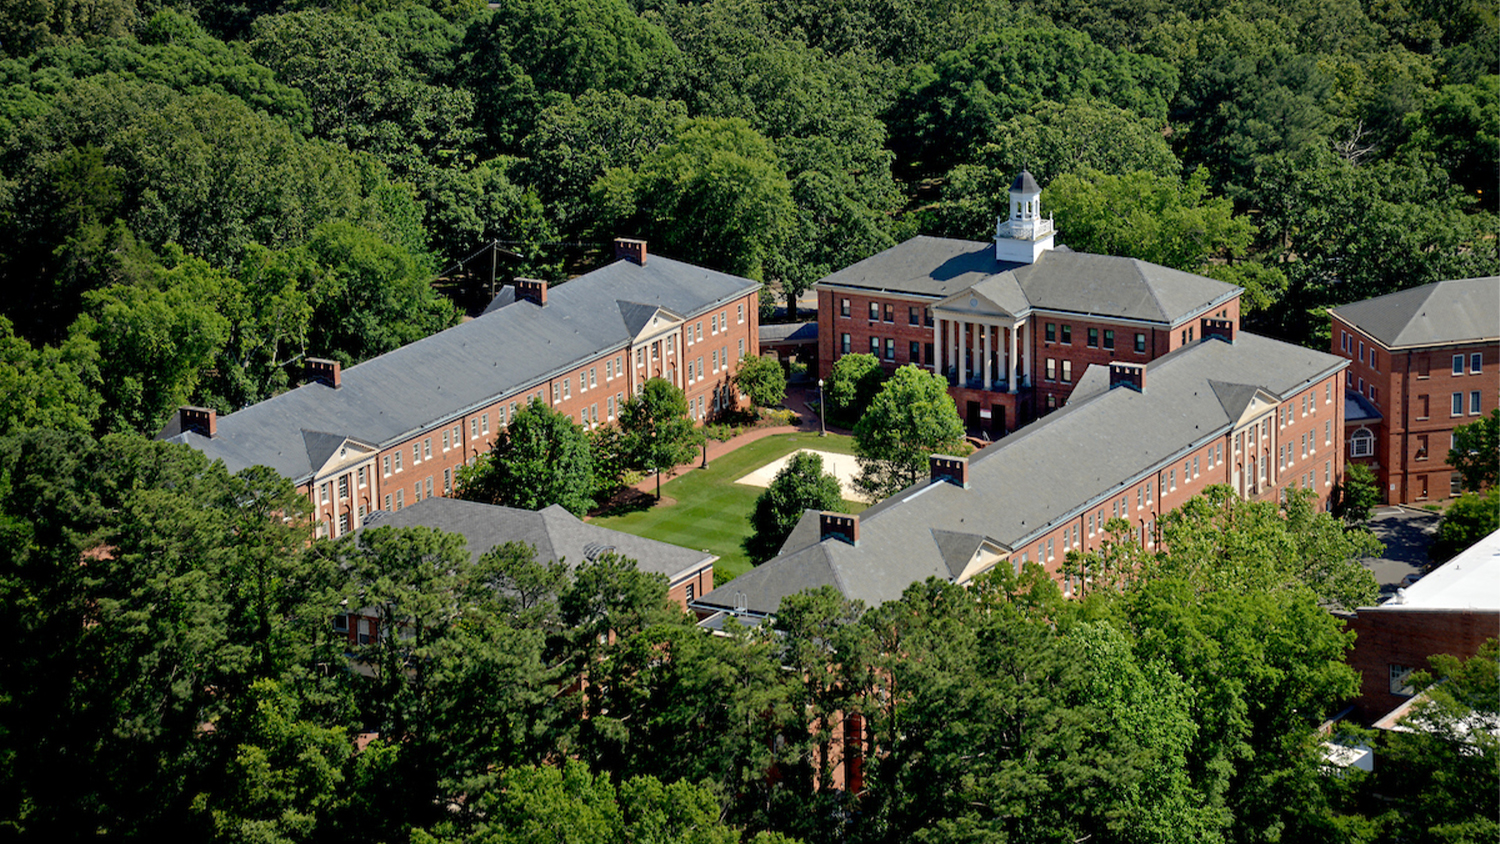 An aerial view of residence halls on campus